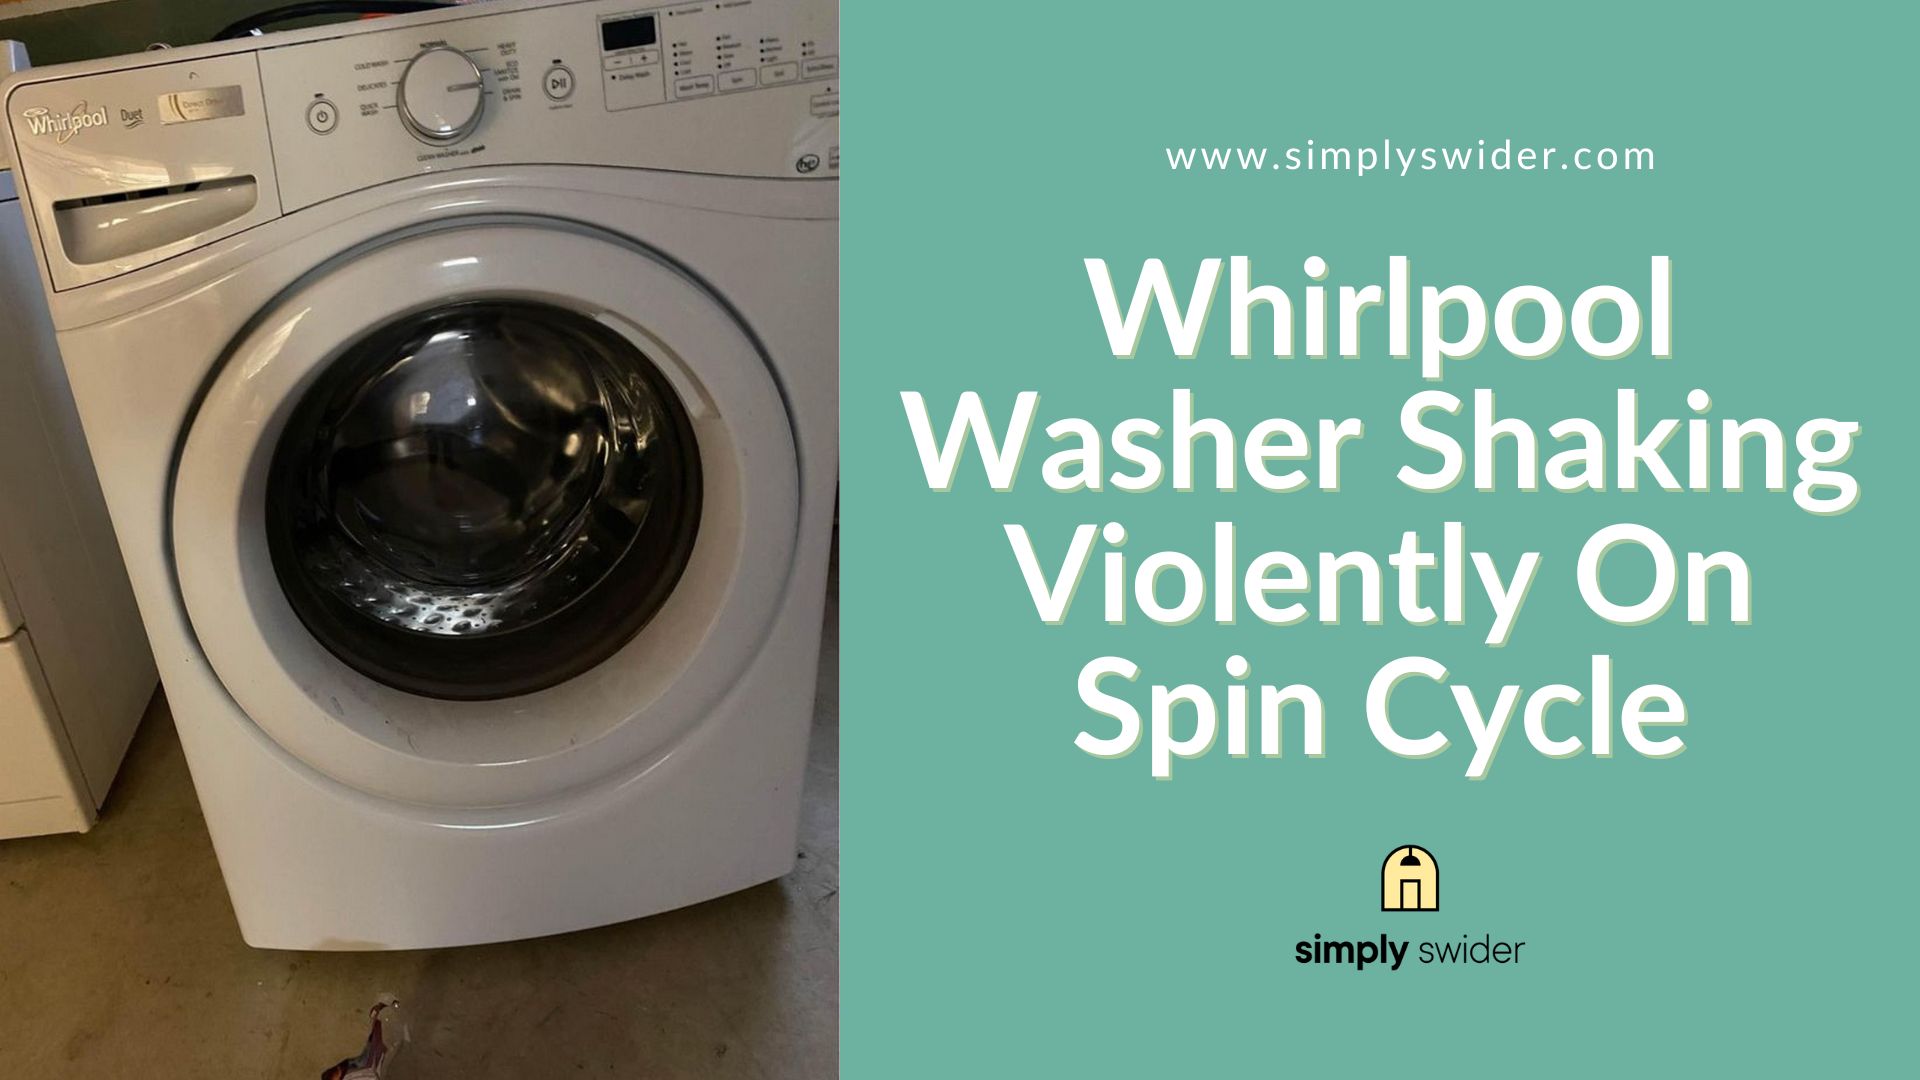 Whirlpool Washer Shaking Violently On Spin Cycle